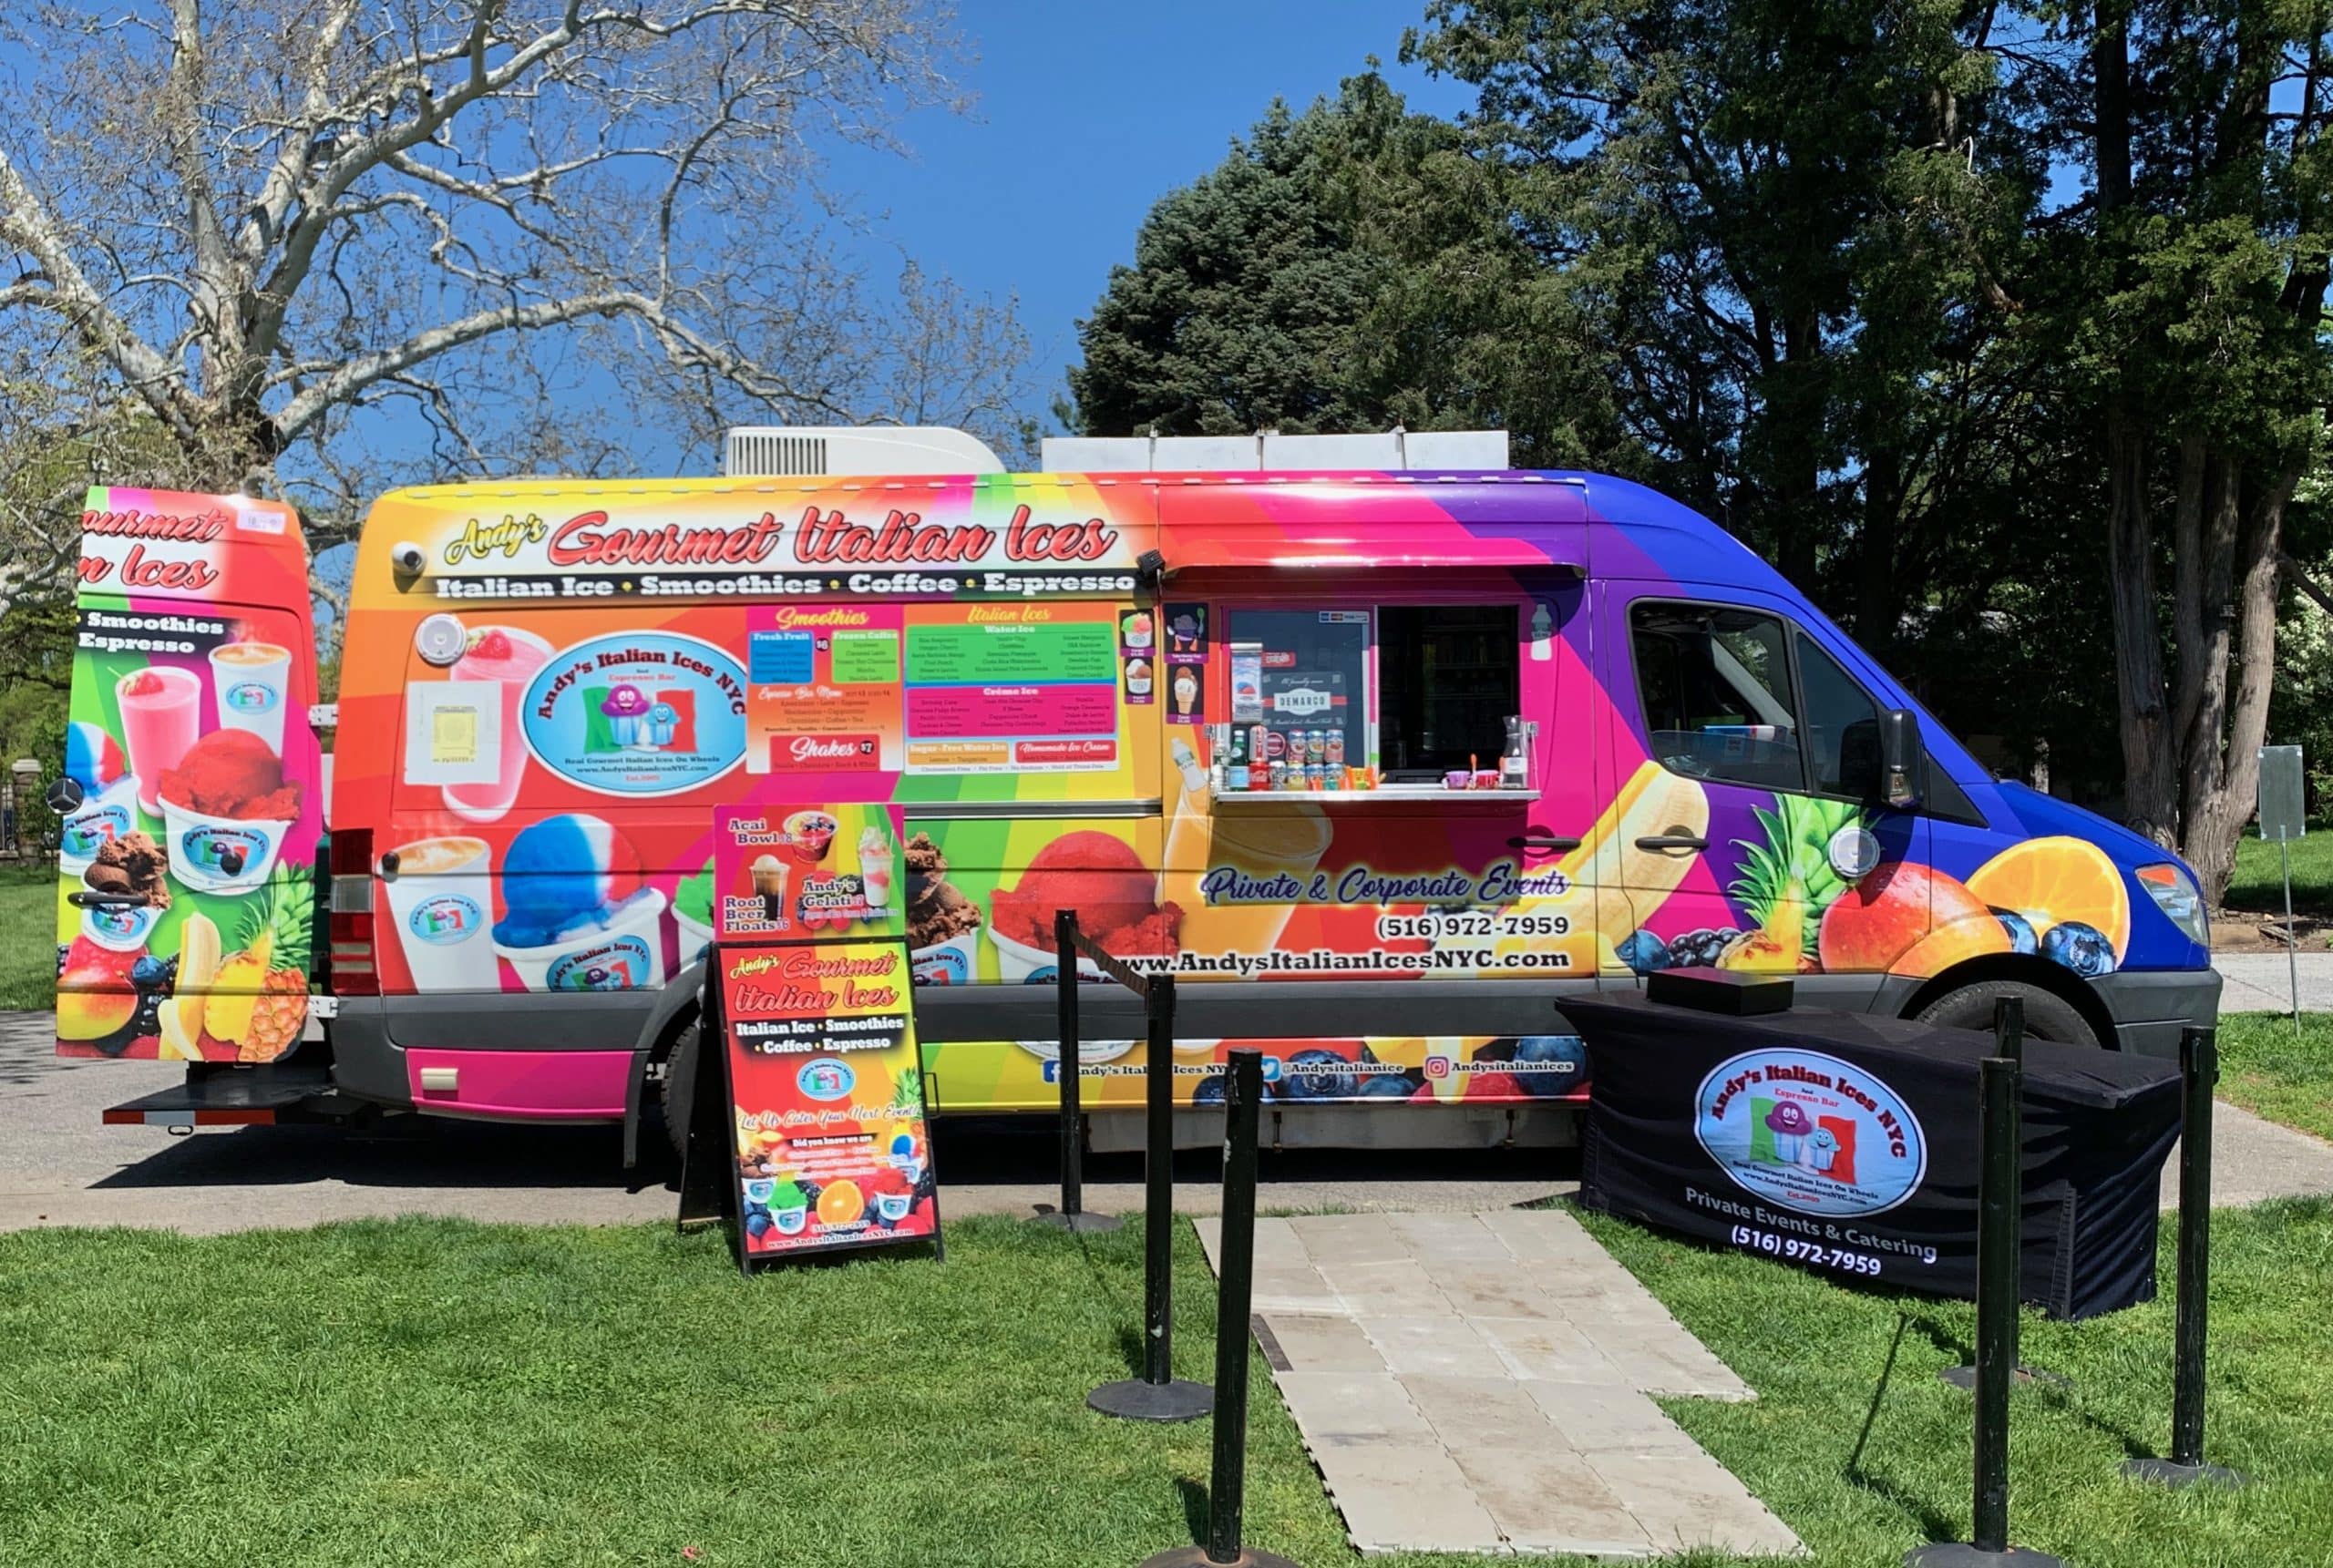 Andy's Italian Ices Food Truck